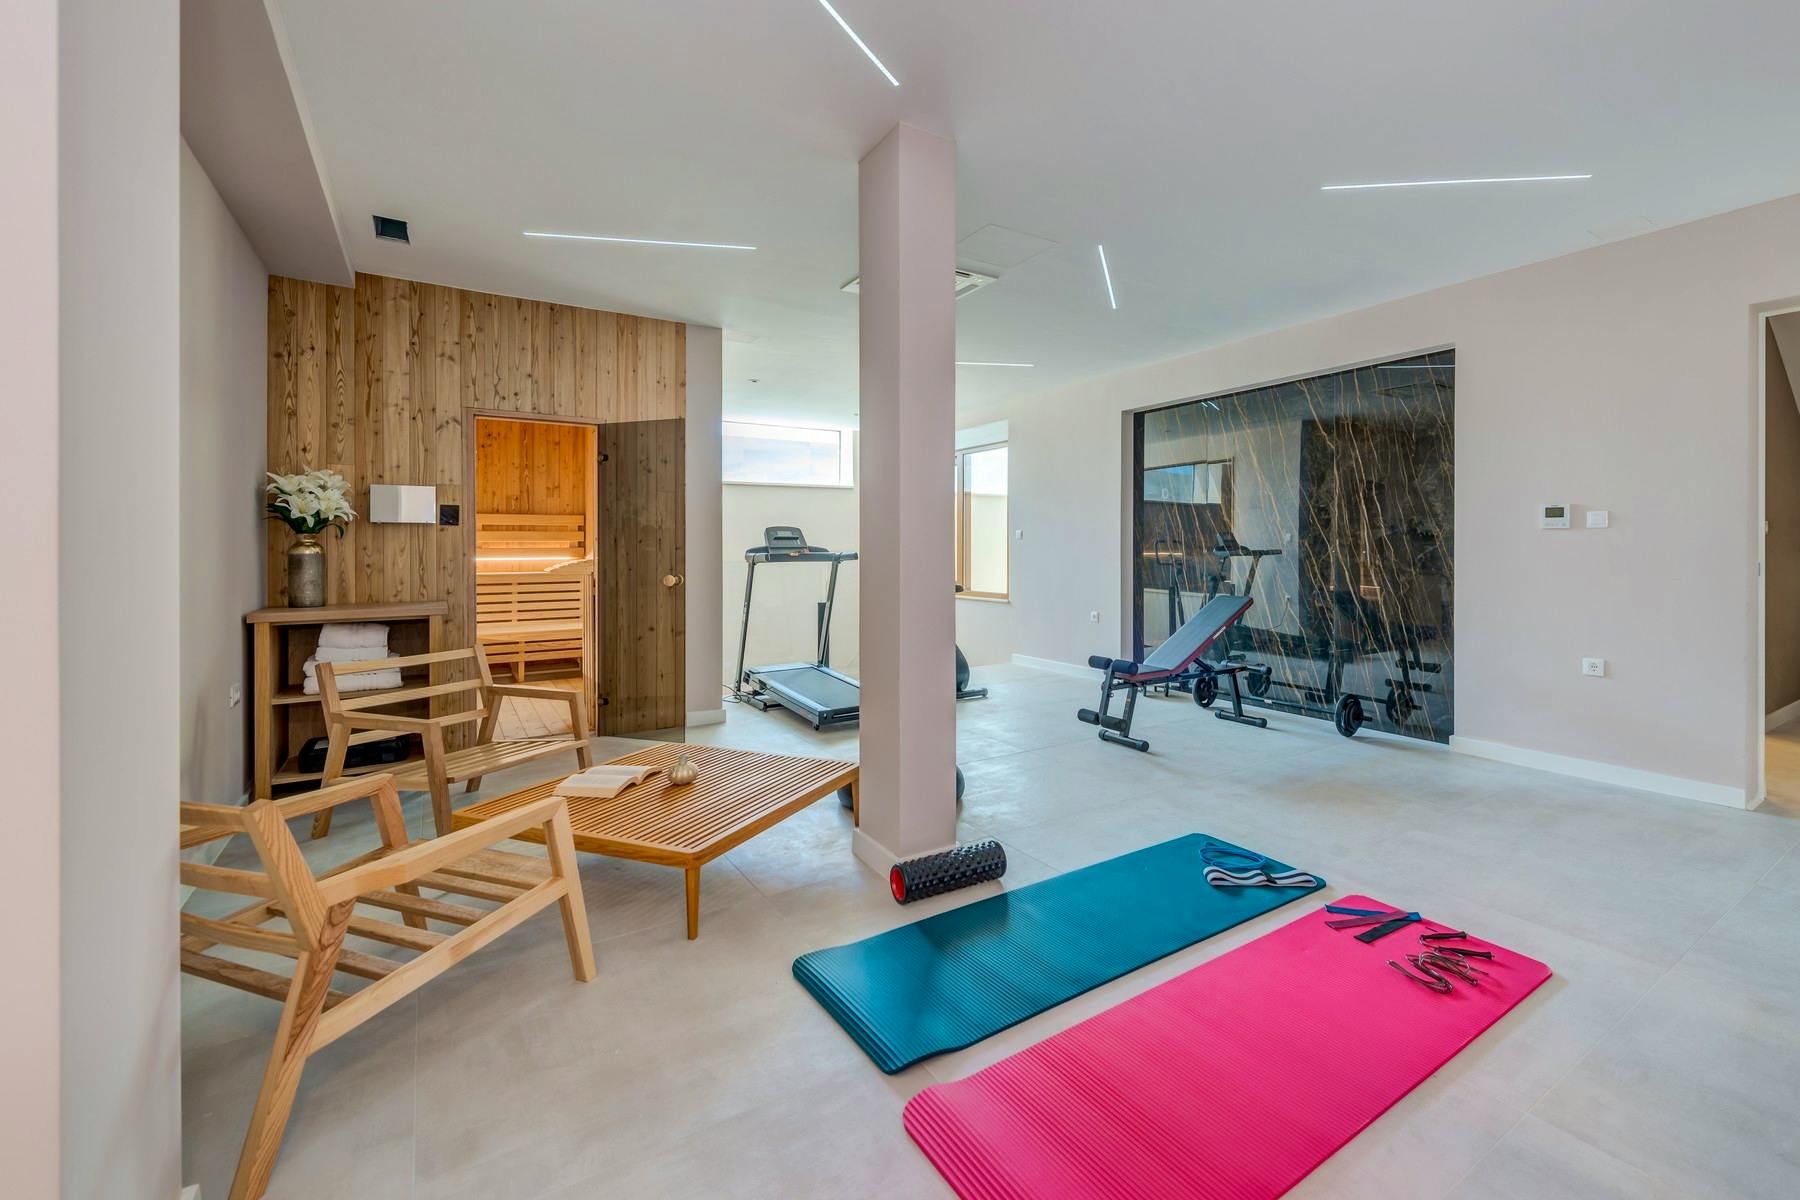 Spa zone with fitness equipment and sauna